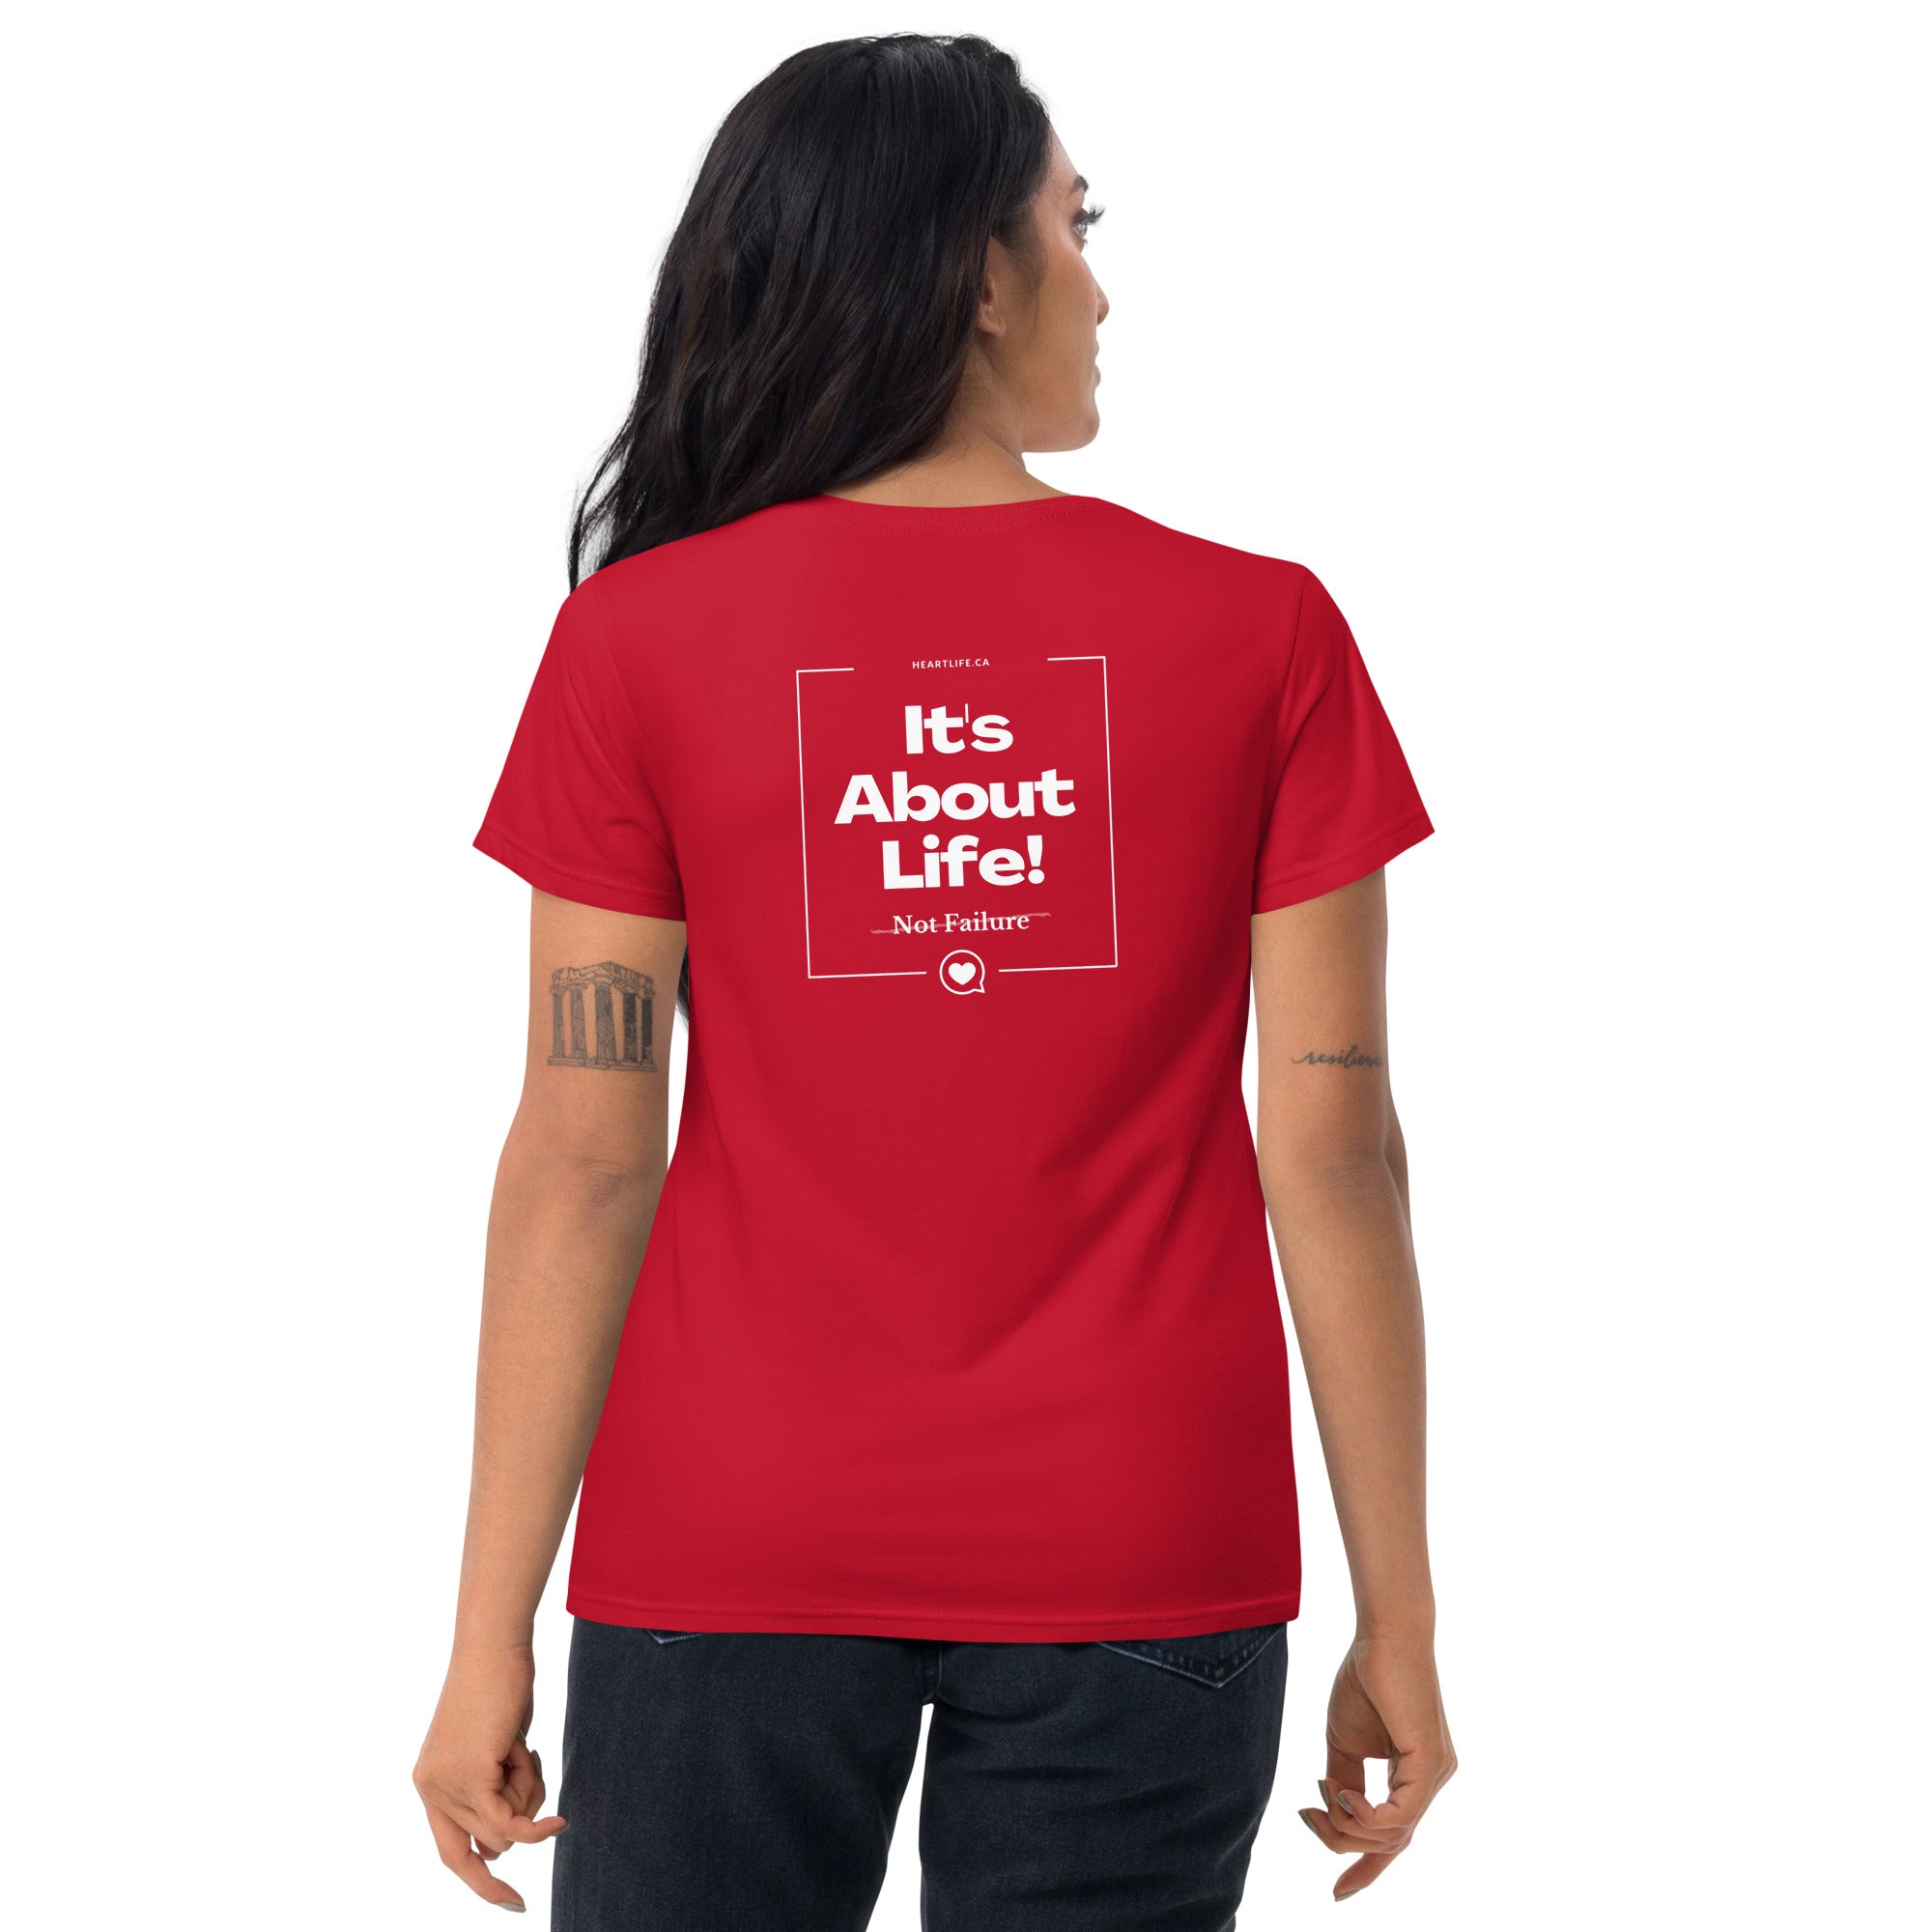 "It’s About Life!" Women's T-Shirt